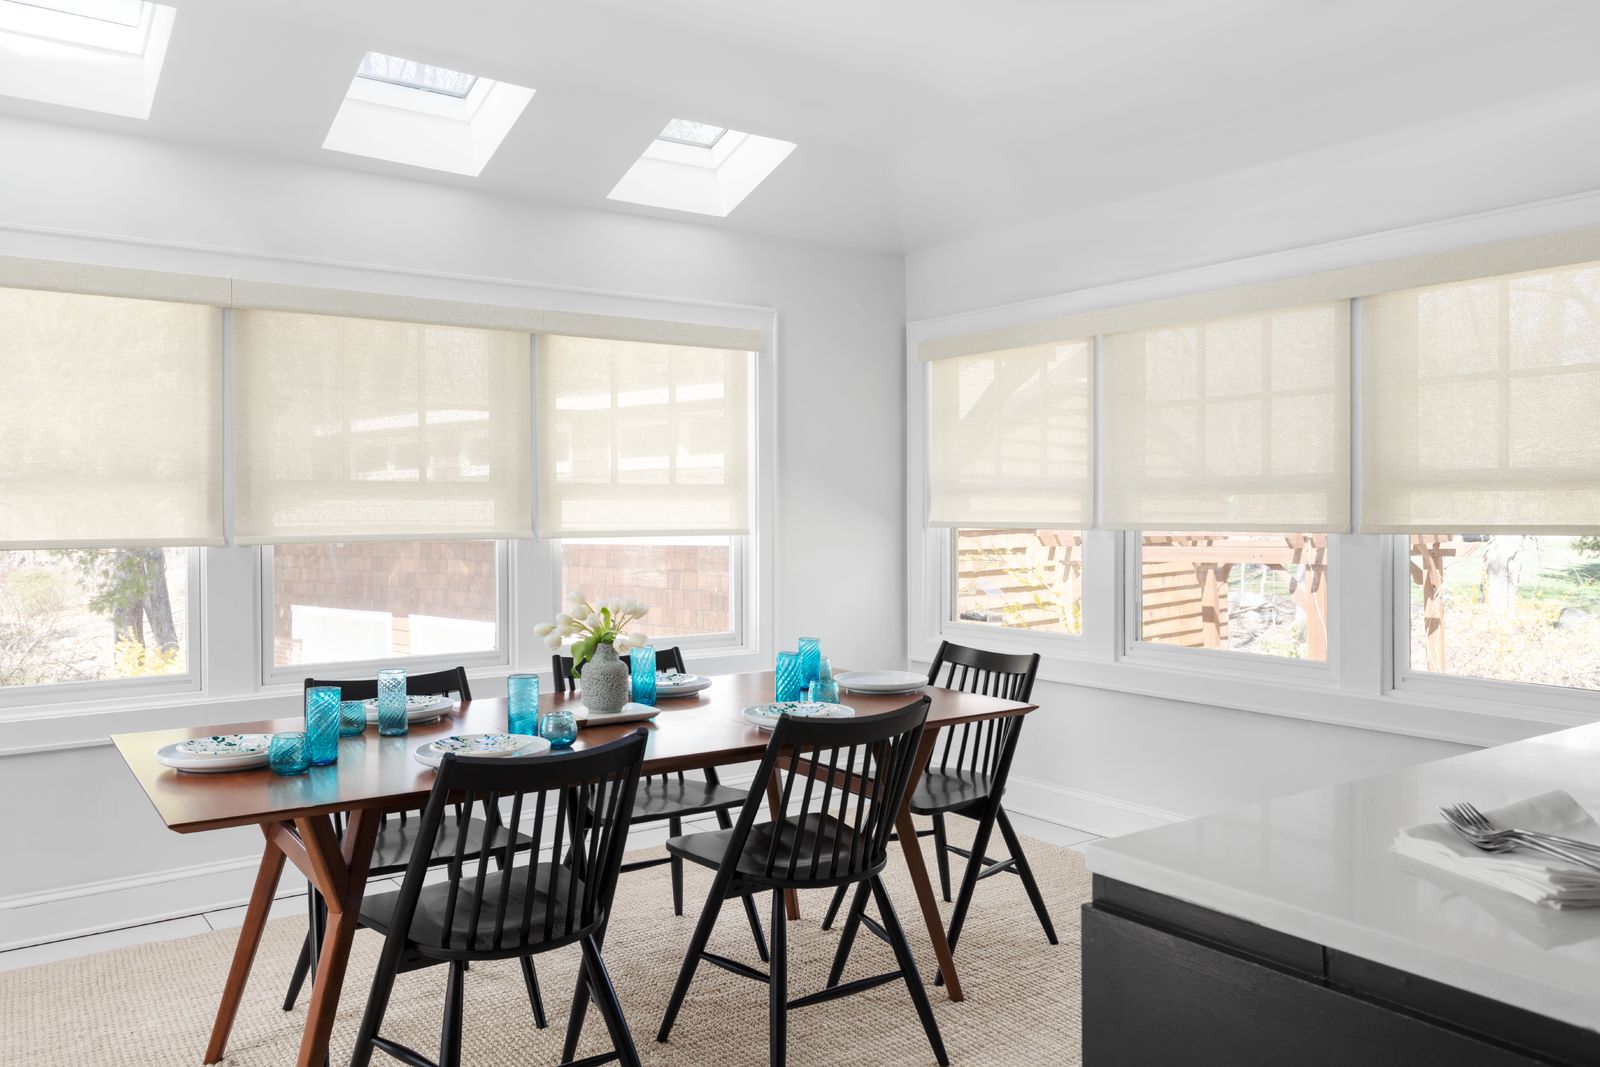 A dining room with a wall of windows features beautiful caramel-colored cascades sheer shades.